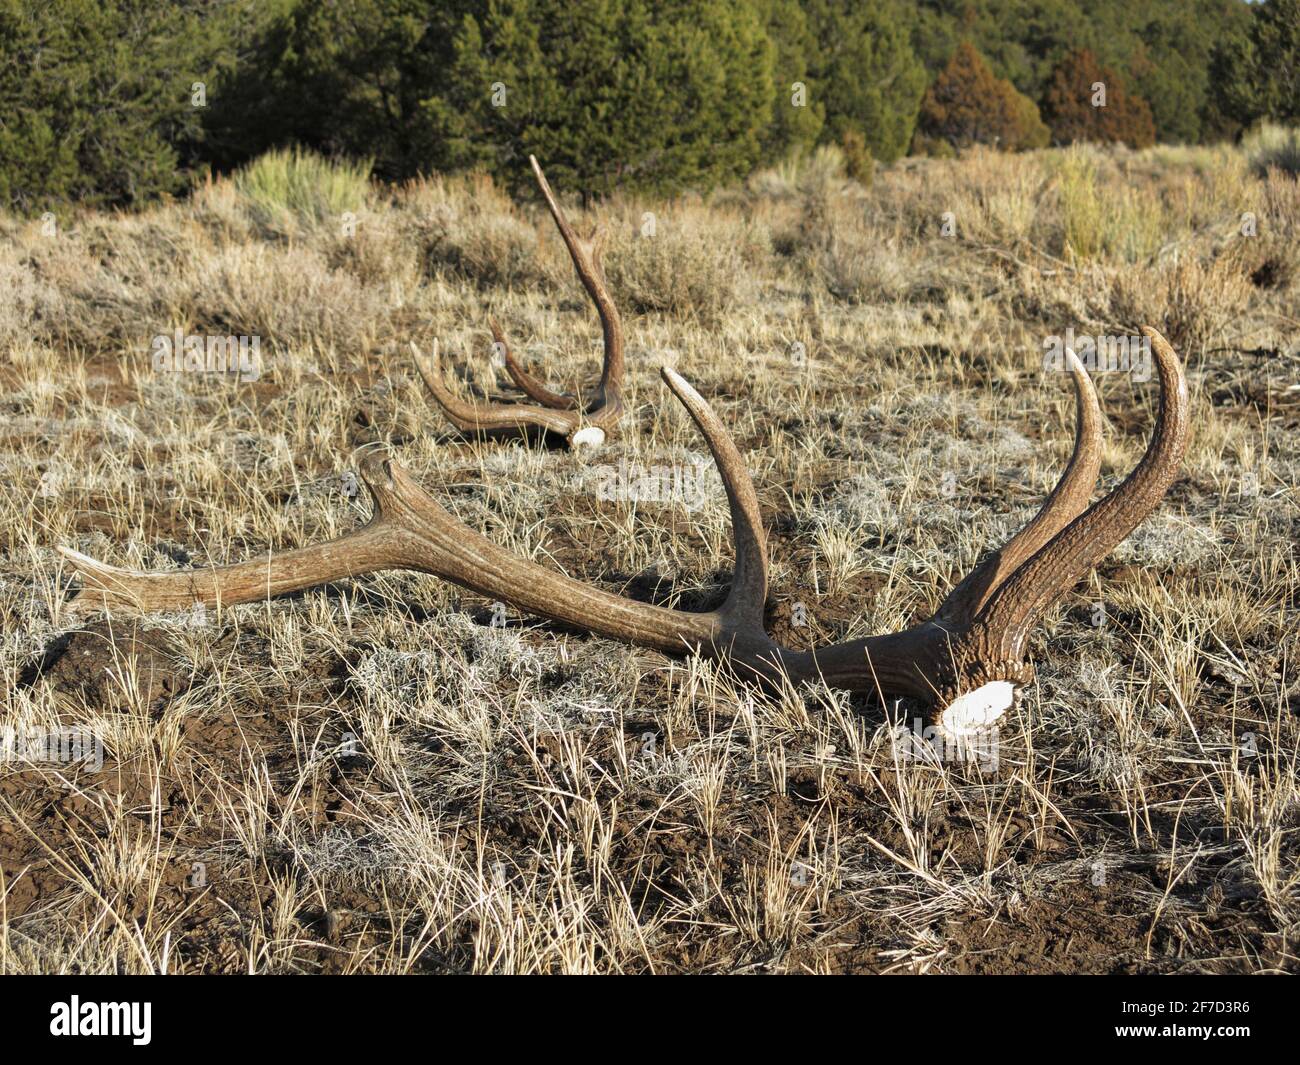 two american elk shed anlters lying in a grassy field outdoors Stock Photo